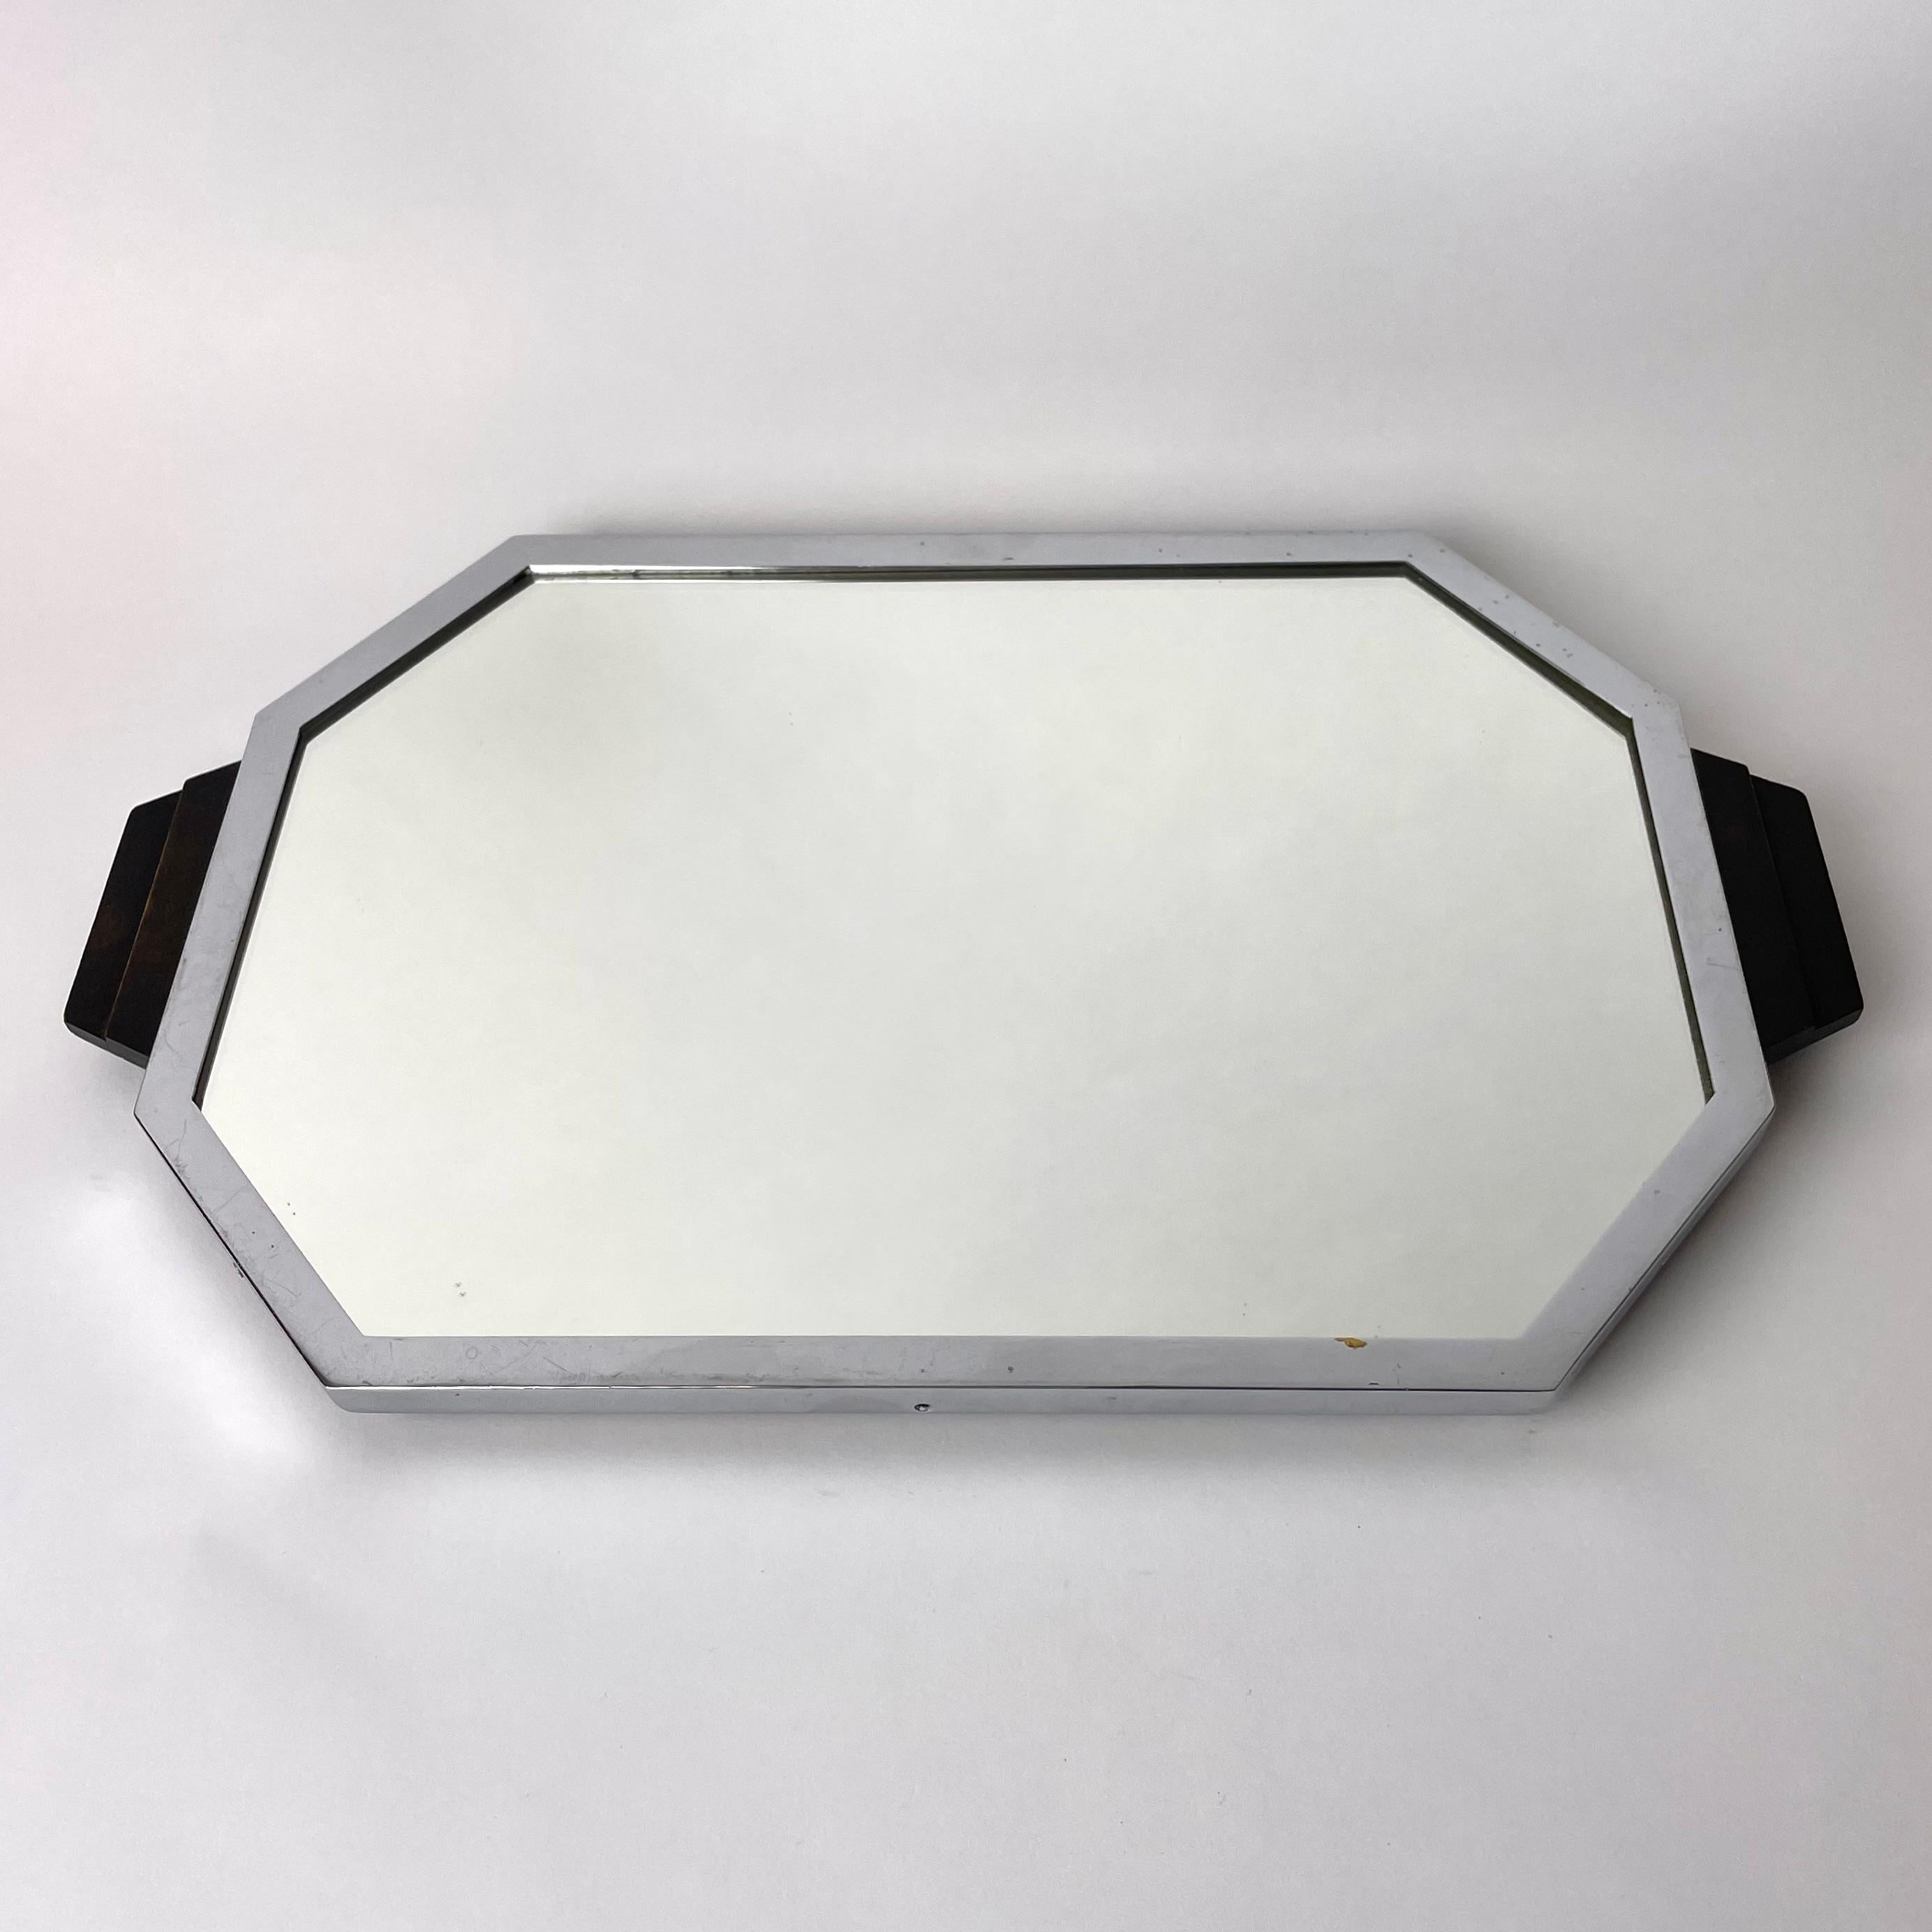 European Elegant Art Deco Tray in Chrome and Blackened Wood with Mirror Glass, 1920s  For Sale